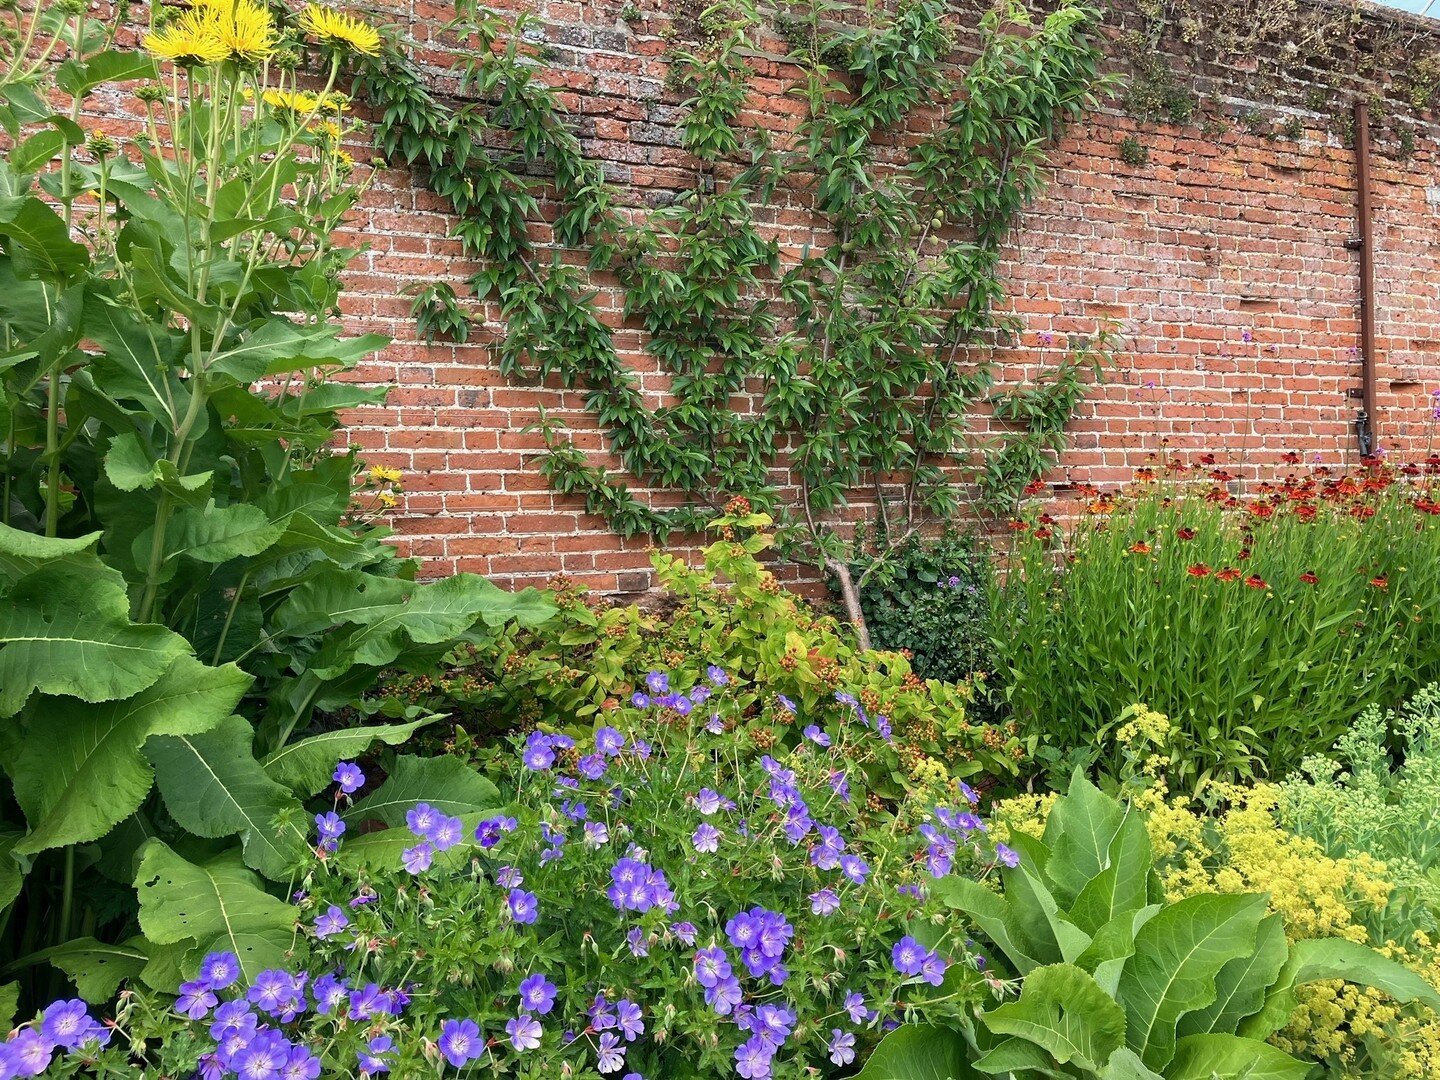 In our gardens, Mike our Head Gardener and his team have been busy cutting the grass after the heavy rains of summer &ndash; with drifts of spring bulbs, daffodils, snowdrops and bluebells being cut back. 

In the walled garden, strawberries, early r